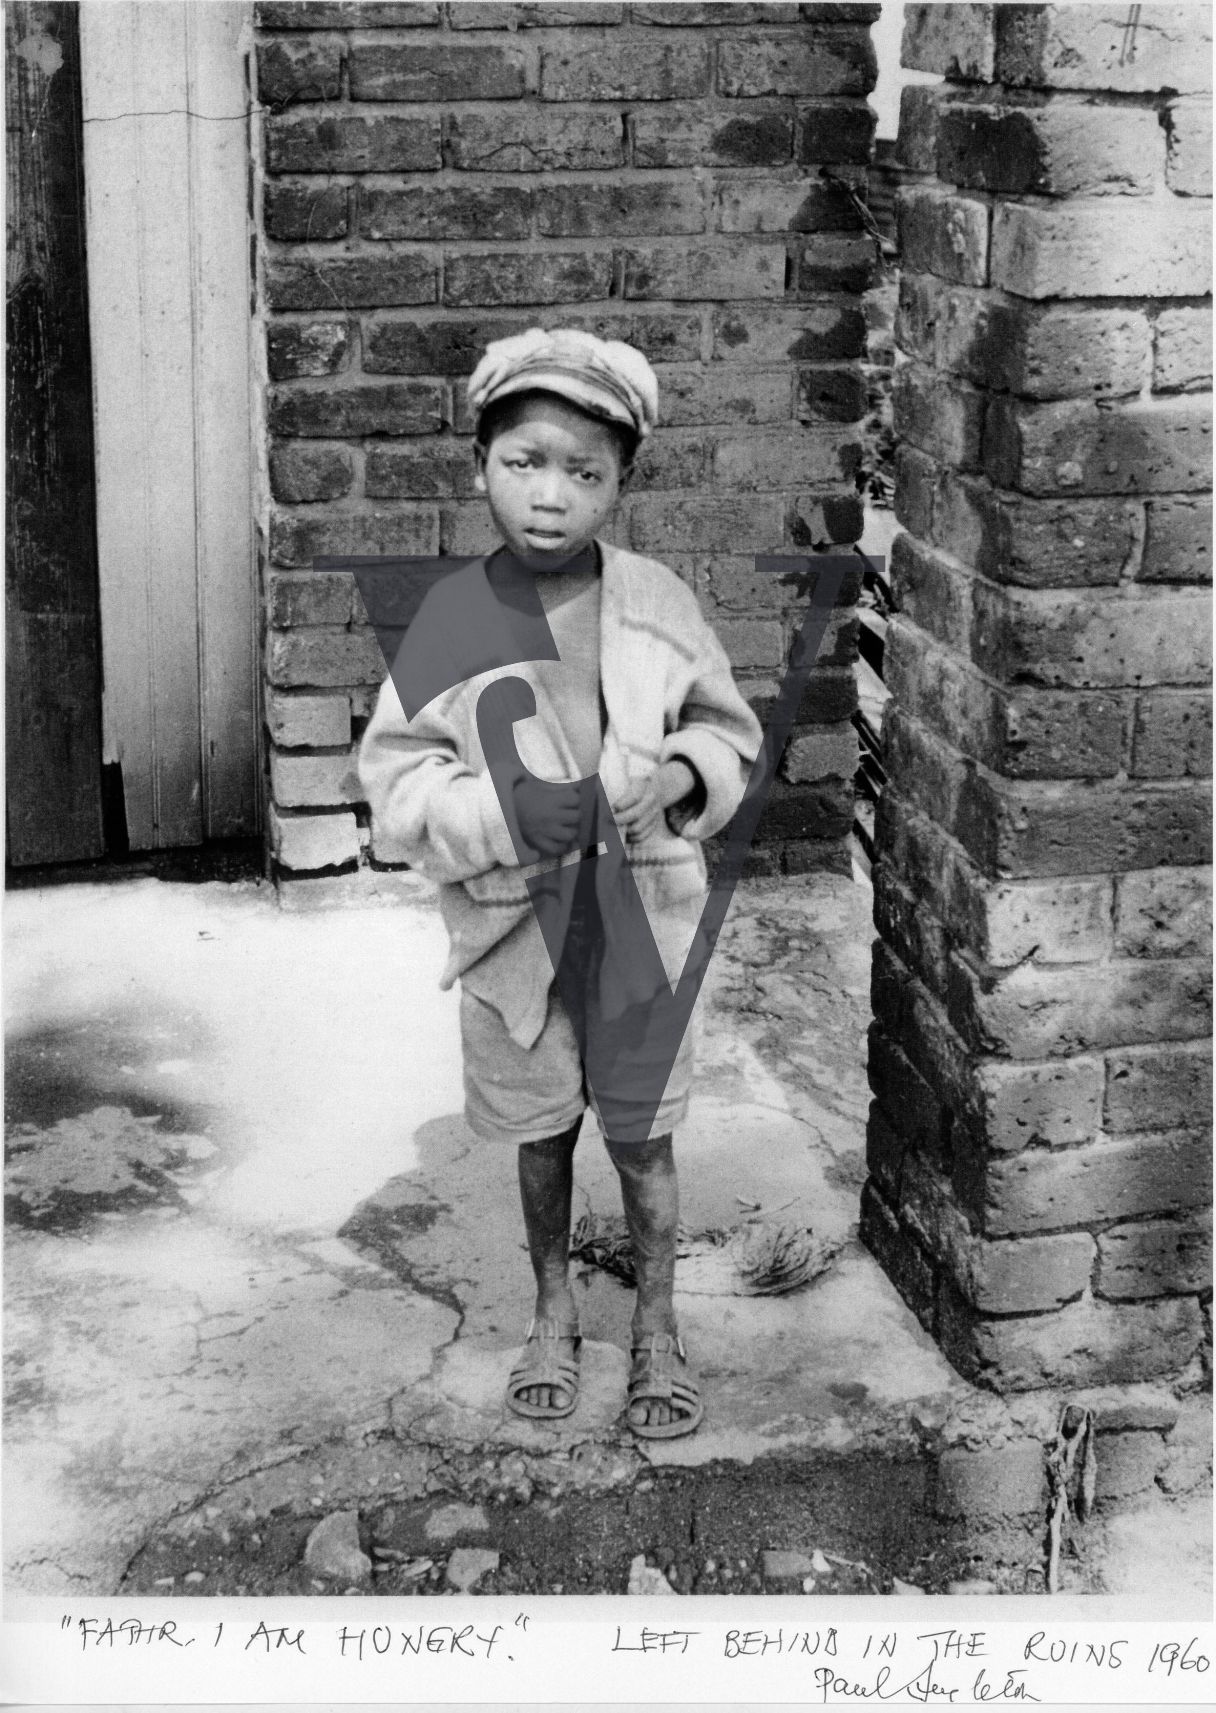 Sophiatown, young boy, 'left behind in the ruins', portrait, poverty.